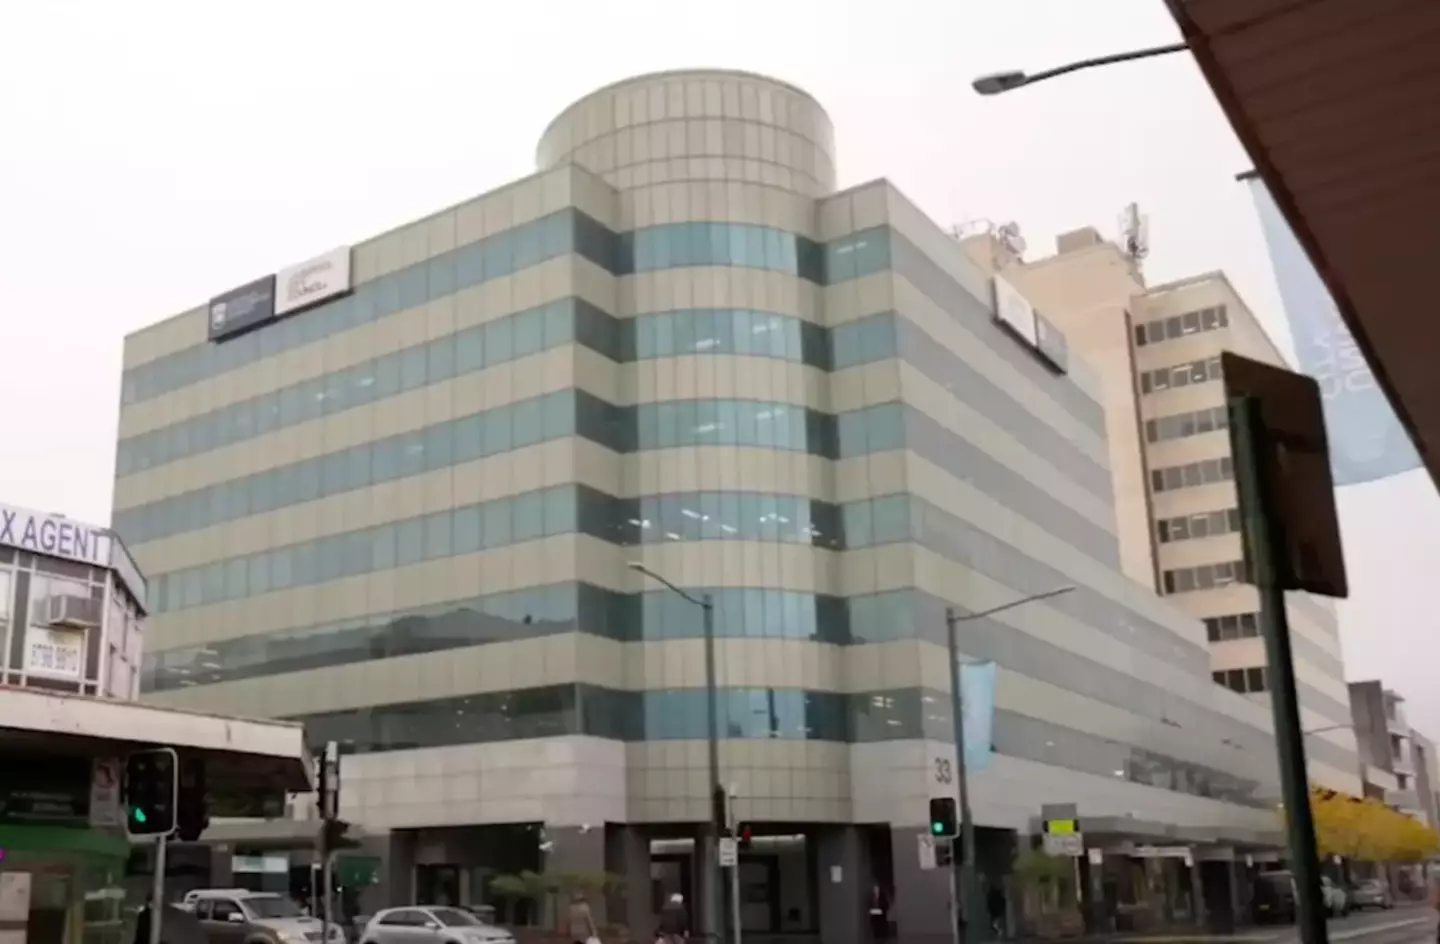 The building's sixth floor has been shut down. (Jenny Havilah was recently diagnosed with thyroid cancer. (9News)